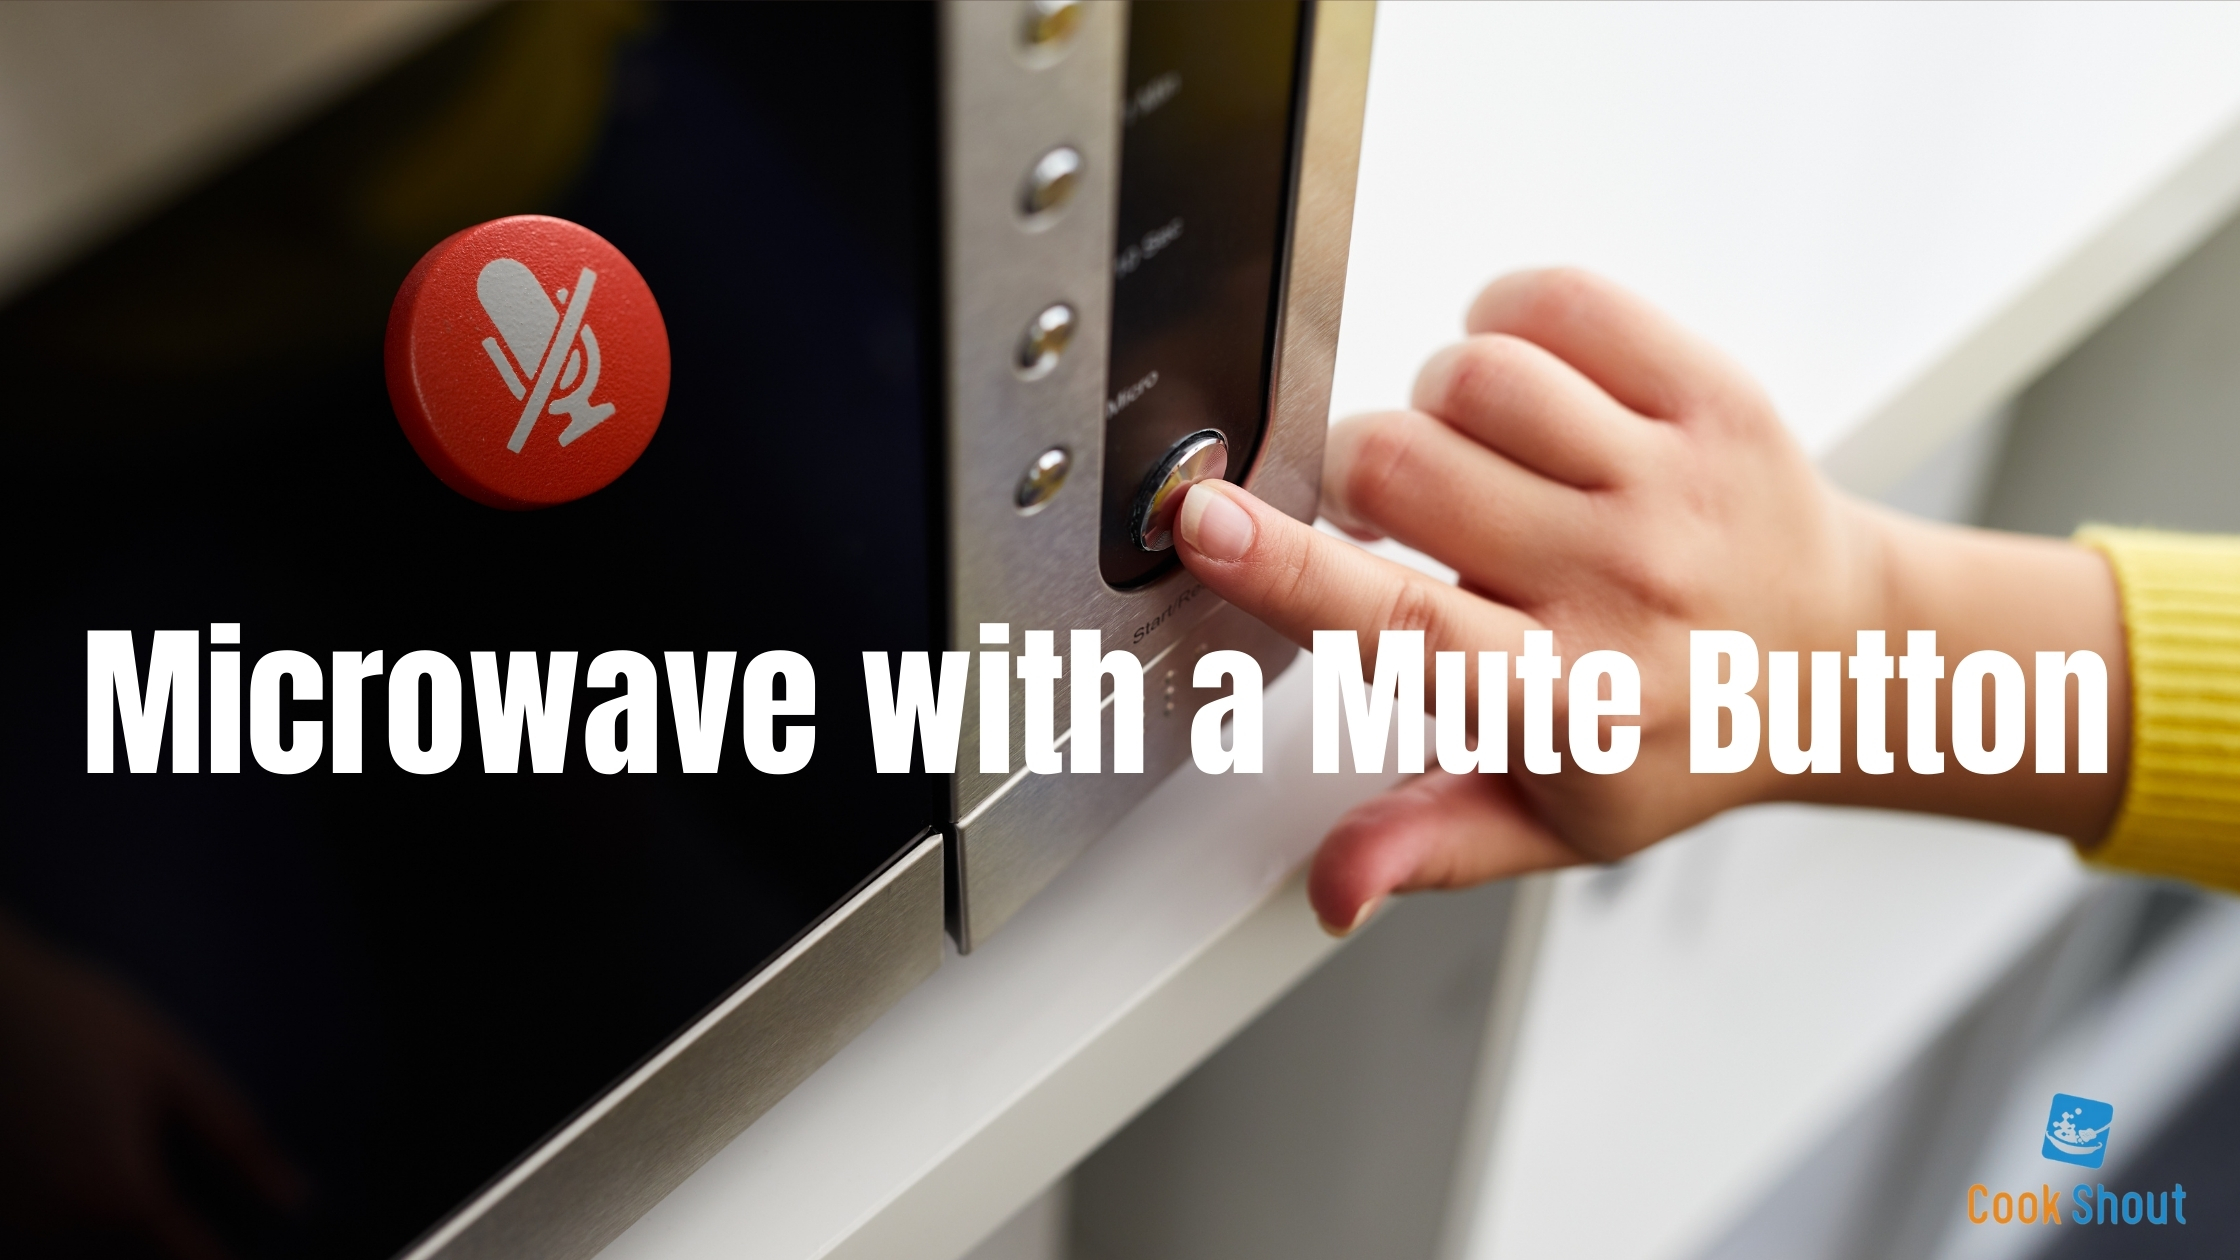 Microwave with a Mute Button